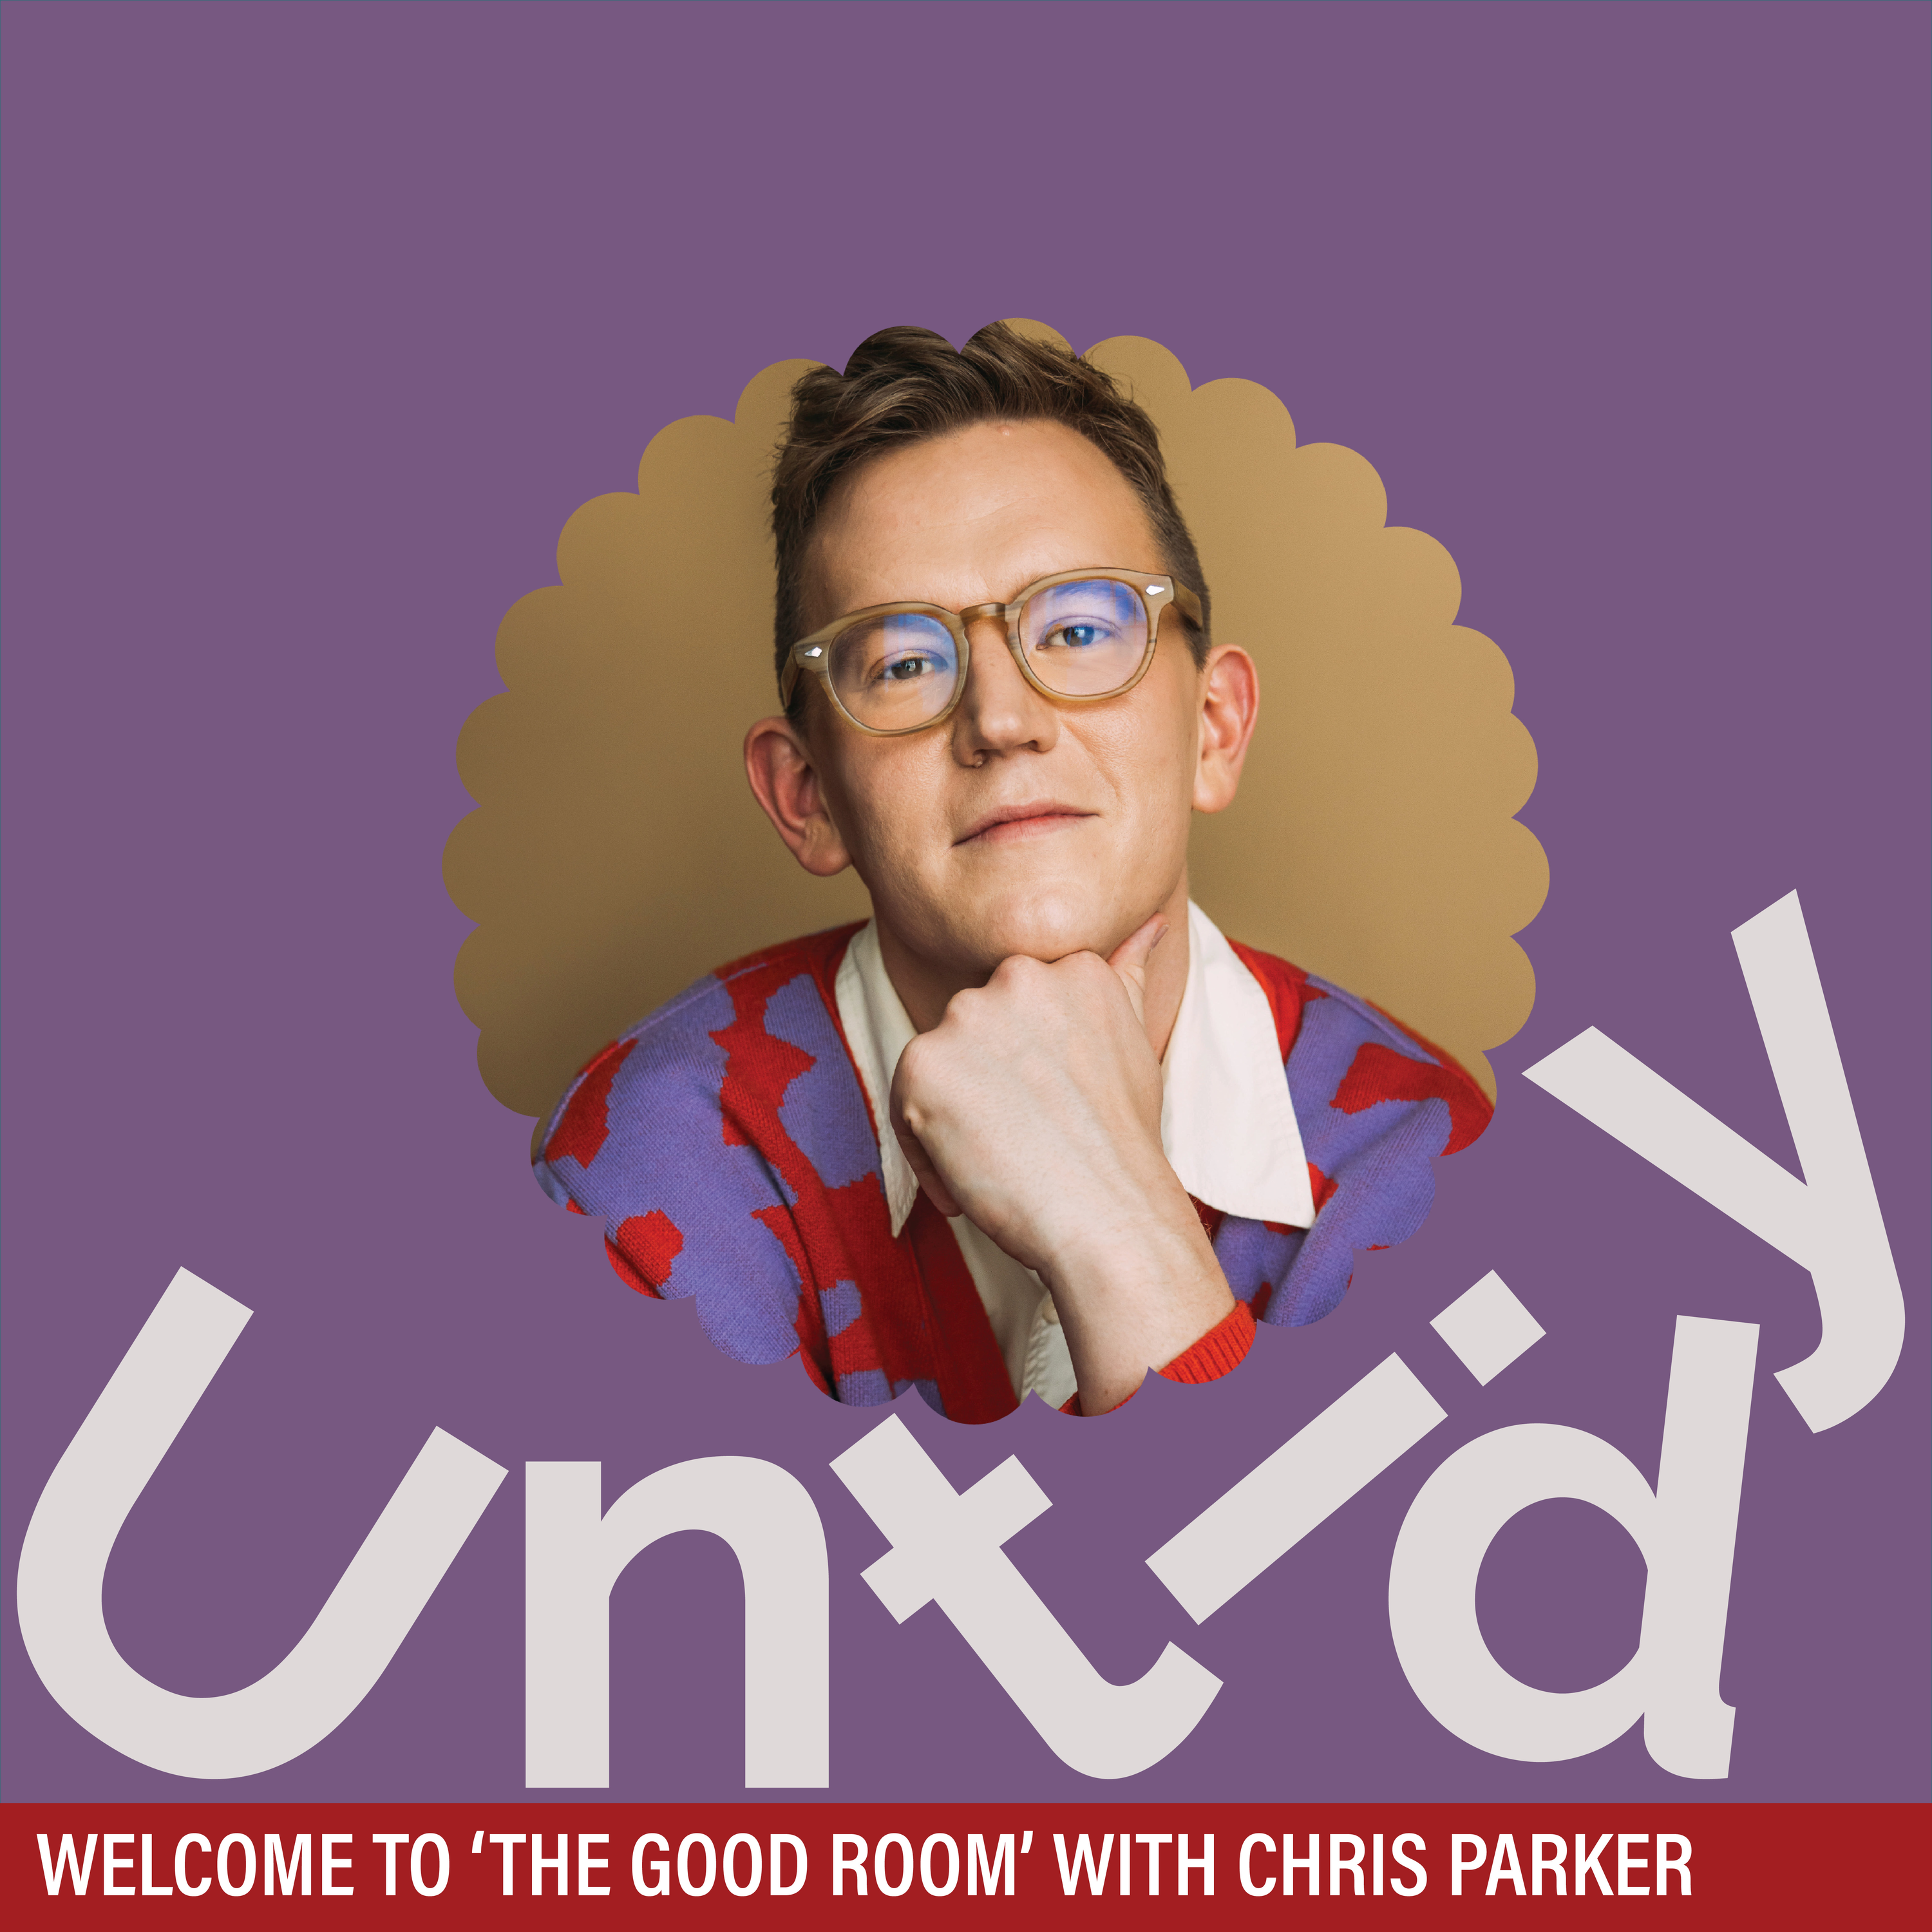 Welcome to 'The Good Room' with Chris Parker